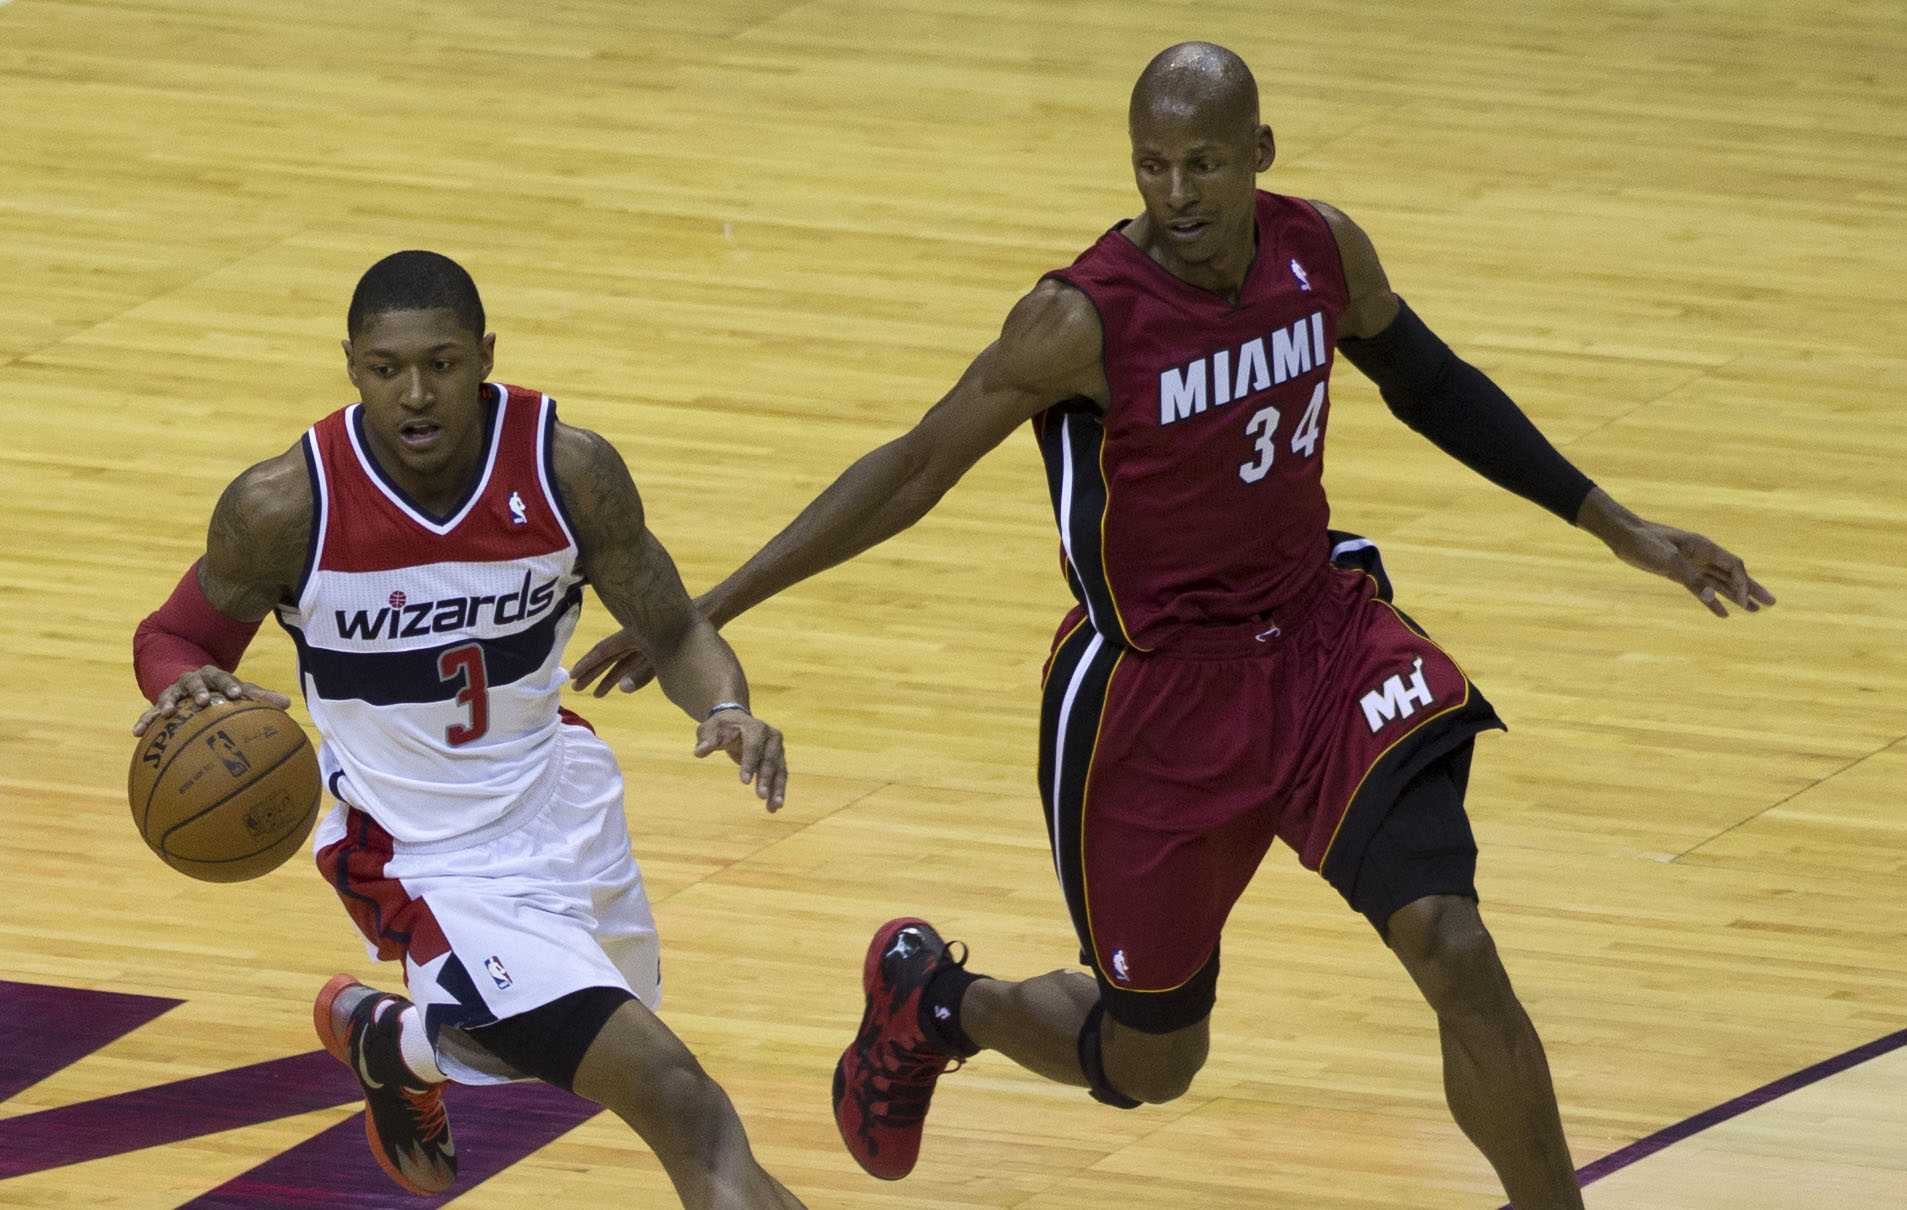 “Scared To Death”: Ray Allen Reveals LeBron James And Co. In Miami Heat Were Afraid of Boston Celtics